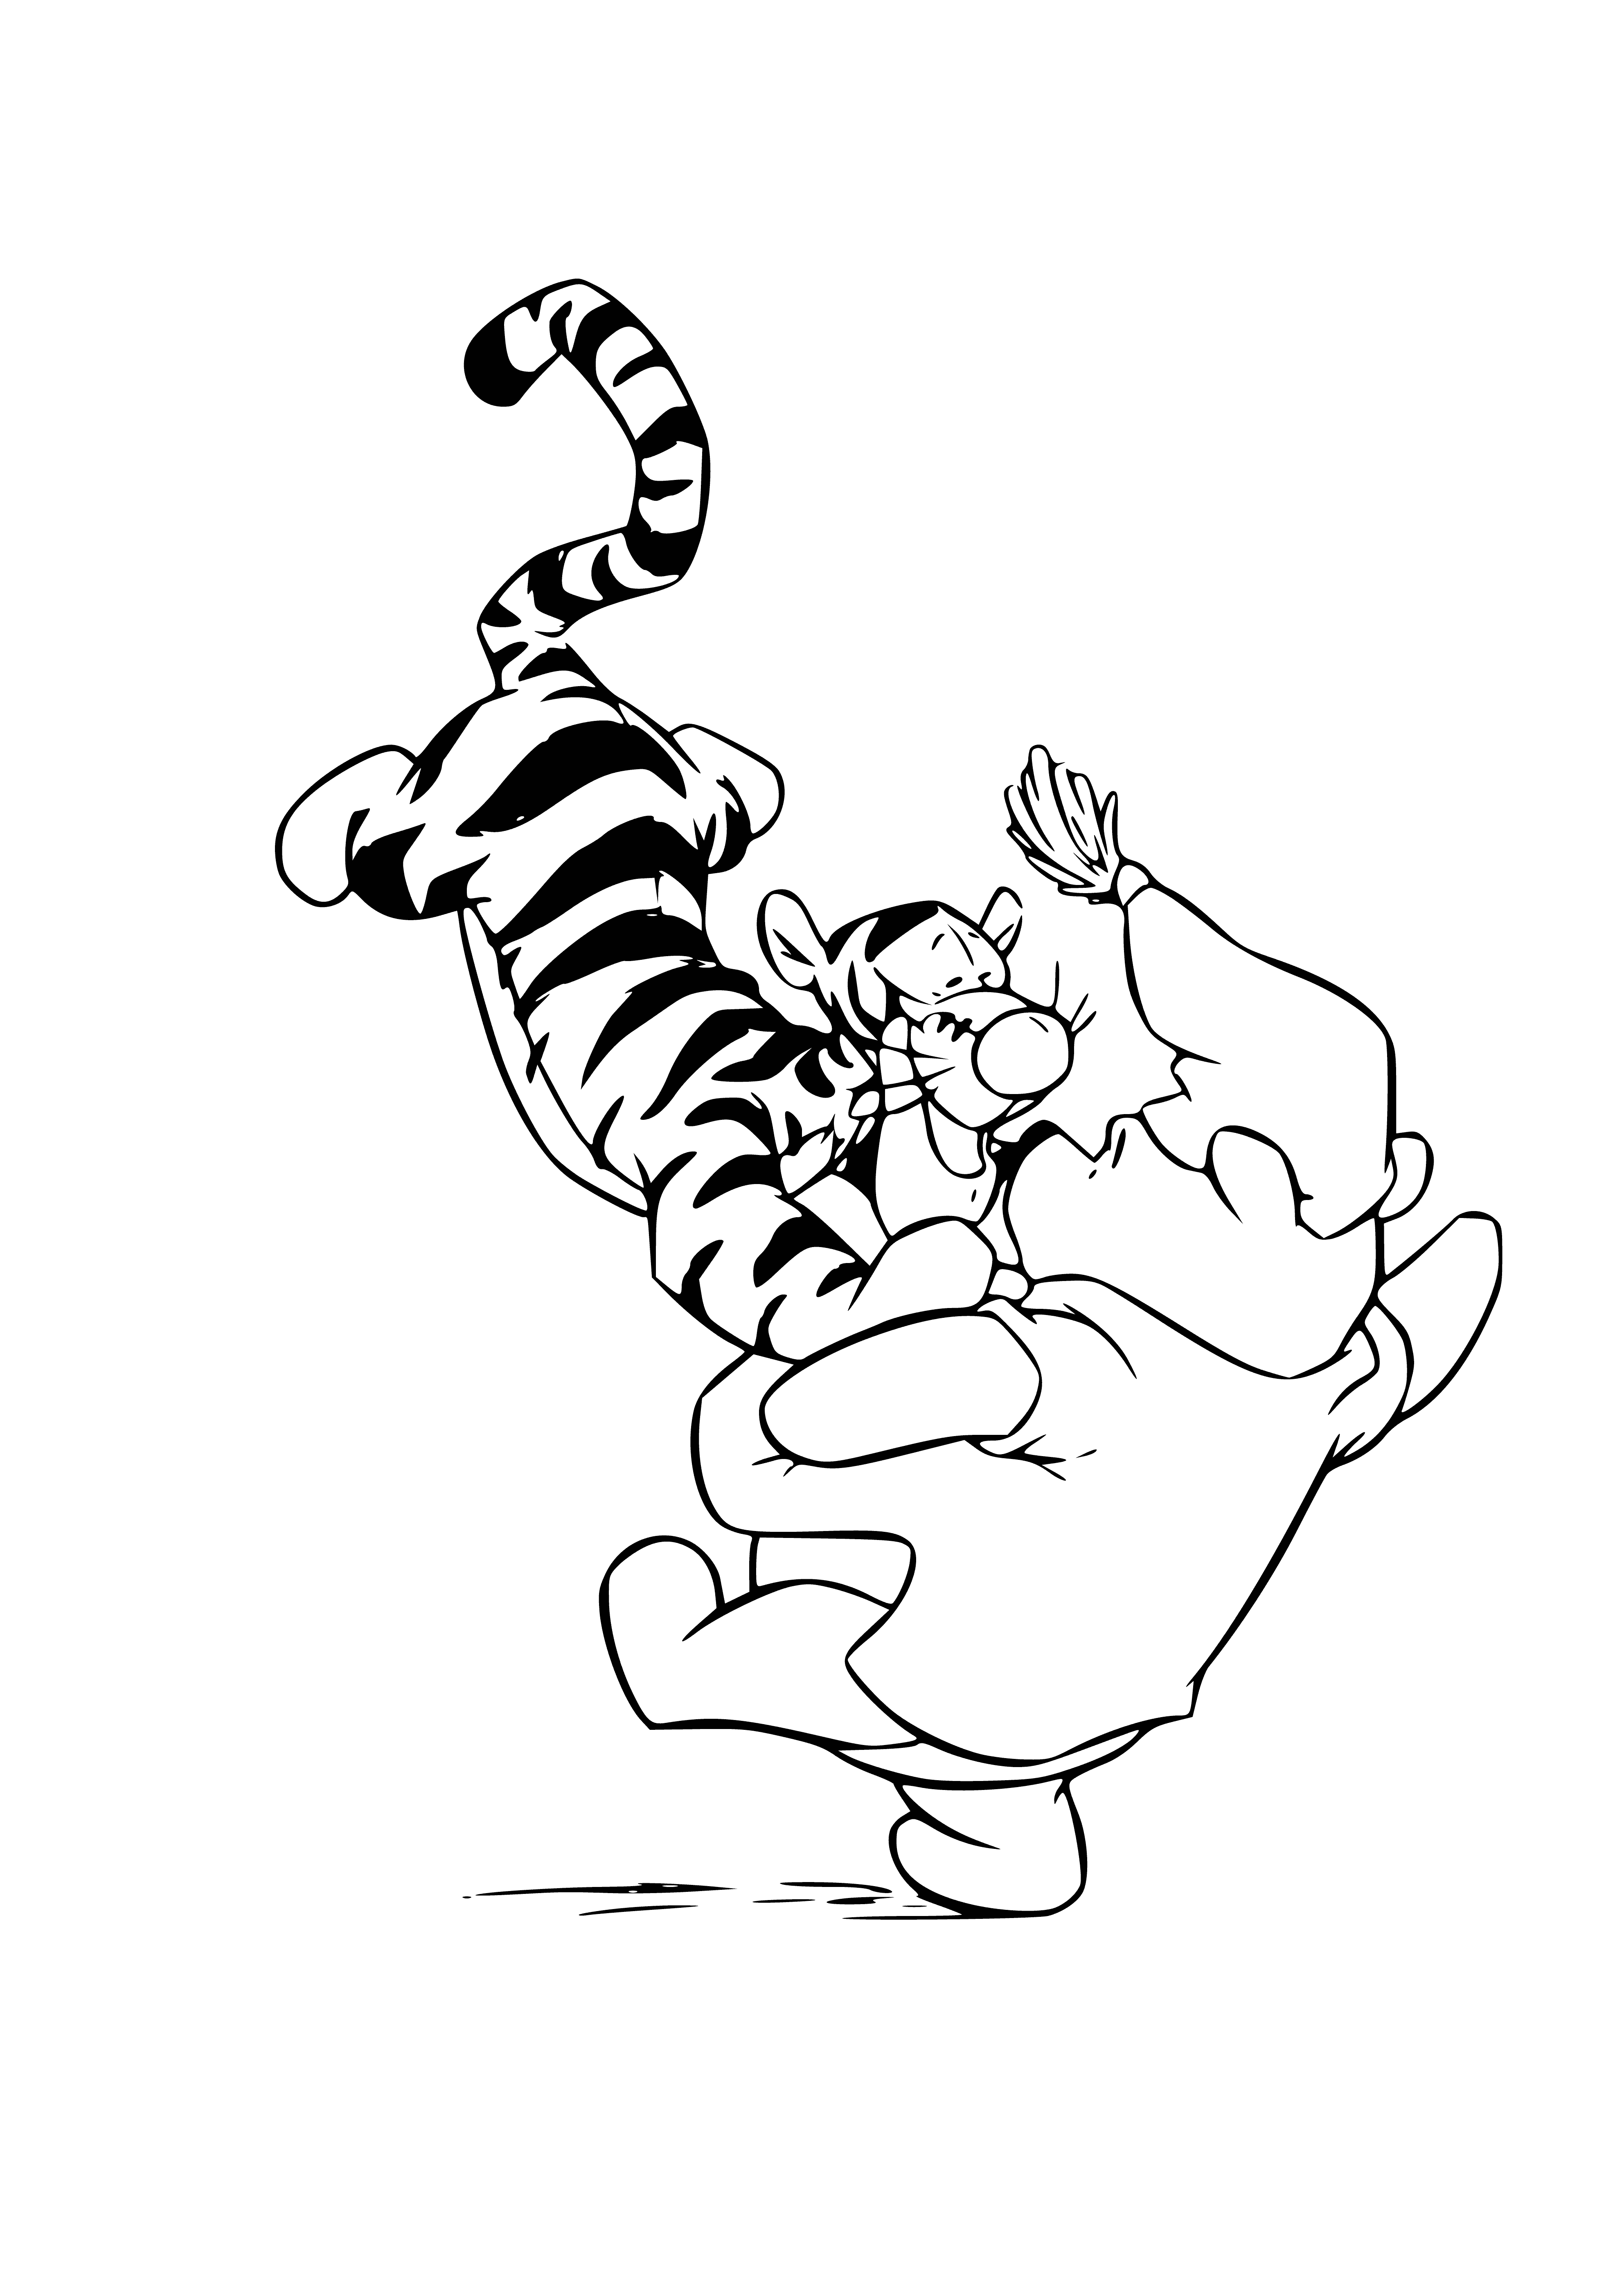 coloring page: Winnie & Tigger share a hug of laughter, Pooh wearing a big smile & Tigger with arms in the air.